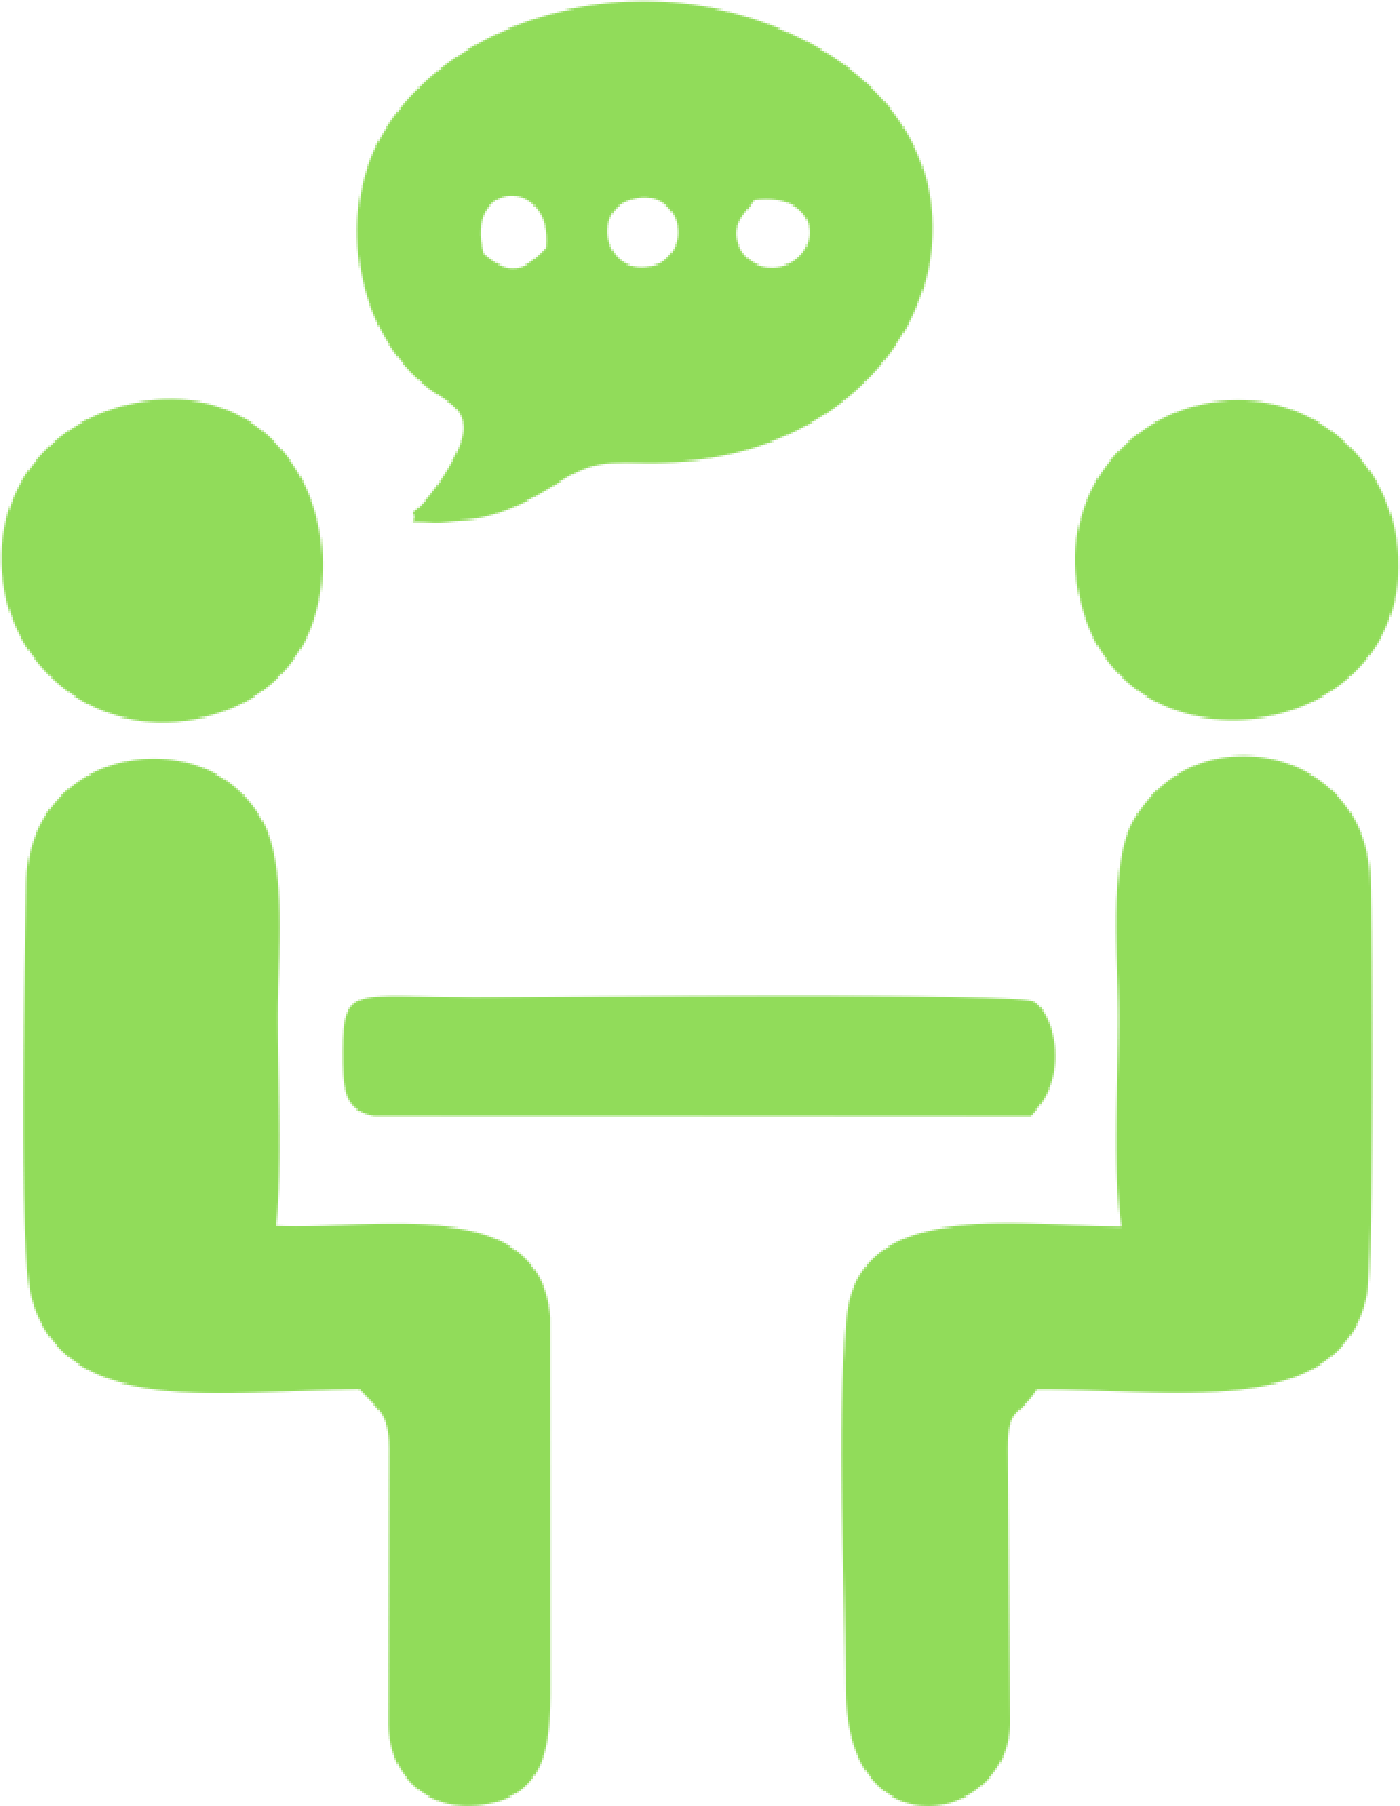 Counselling Services - Face To Face Meeting Icon (1400x1806)